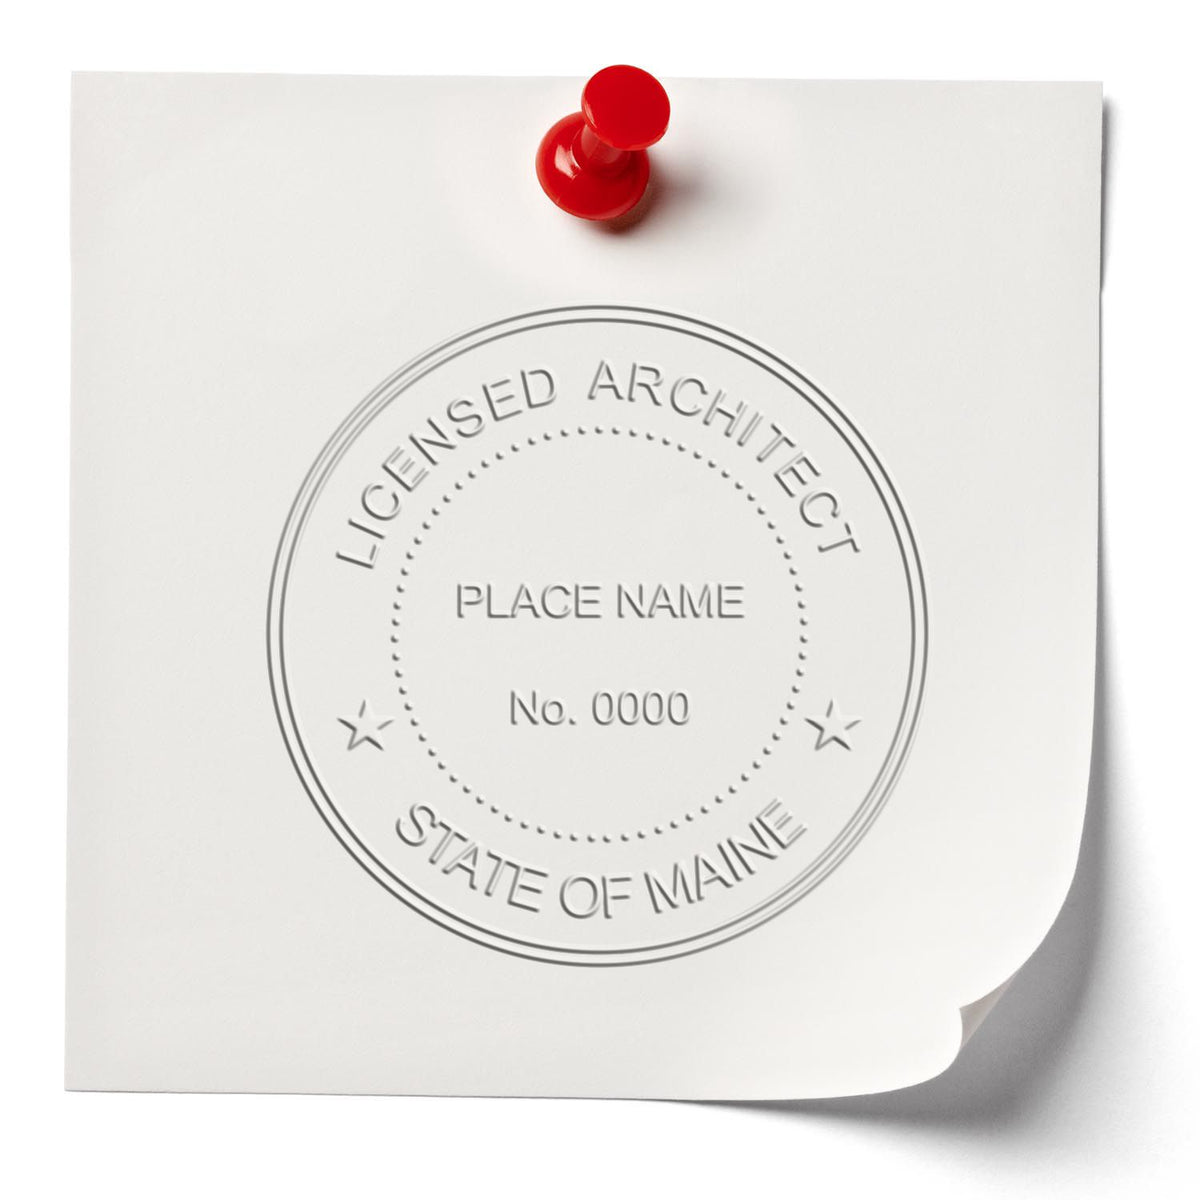 This paper is stamped with a sample imprint of the Extended Long Reach Maine Architect Seal Embosser, signifying its quality and reliability.